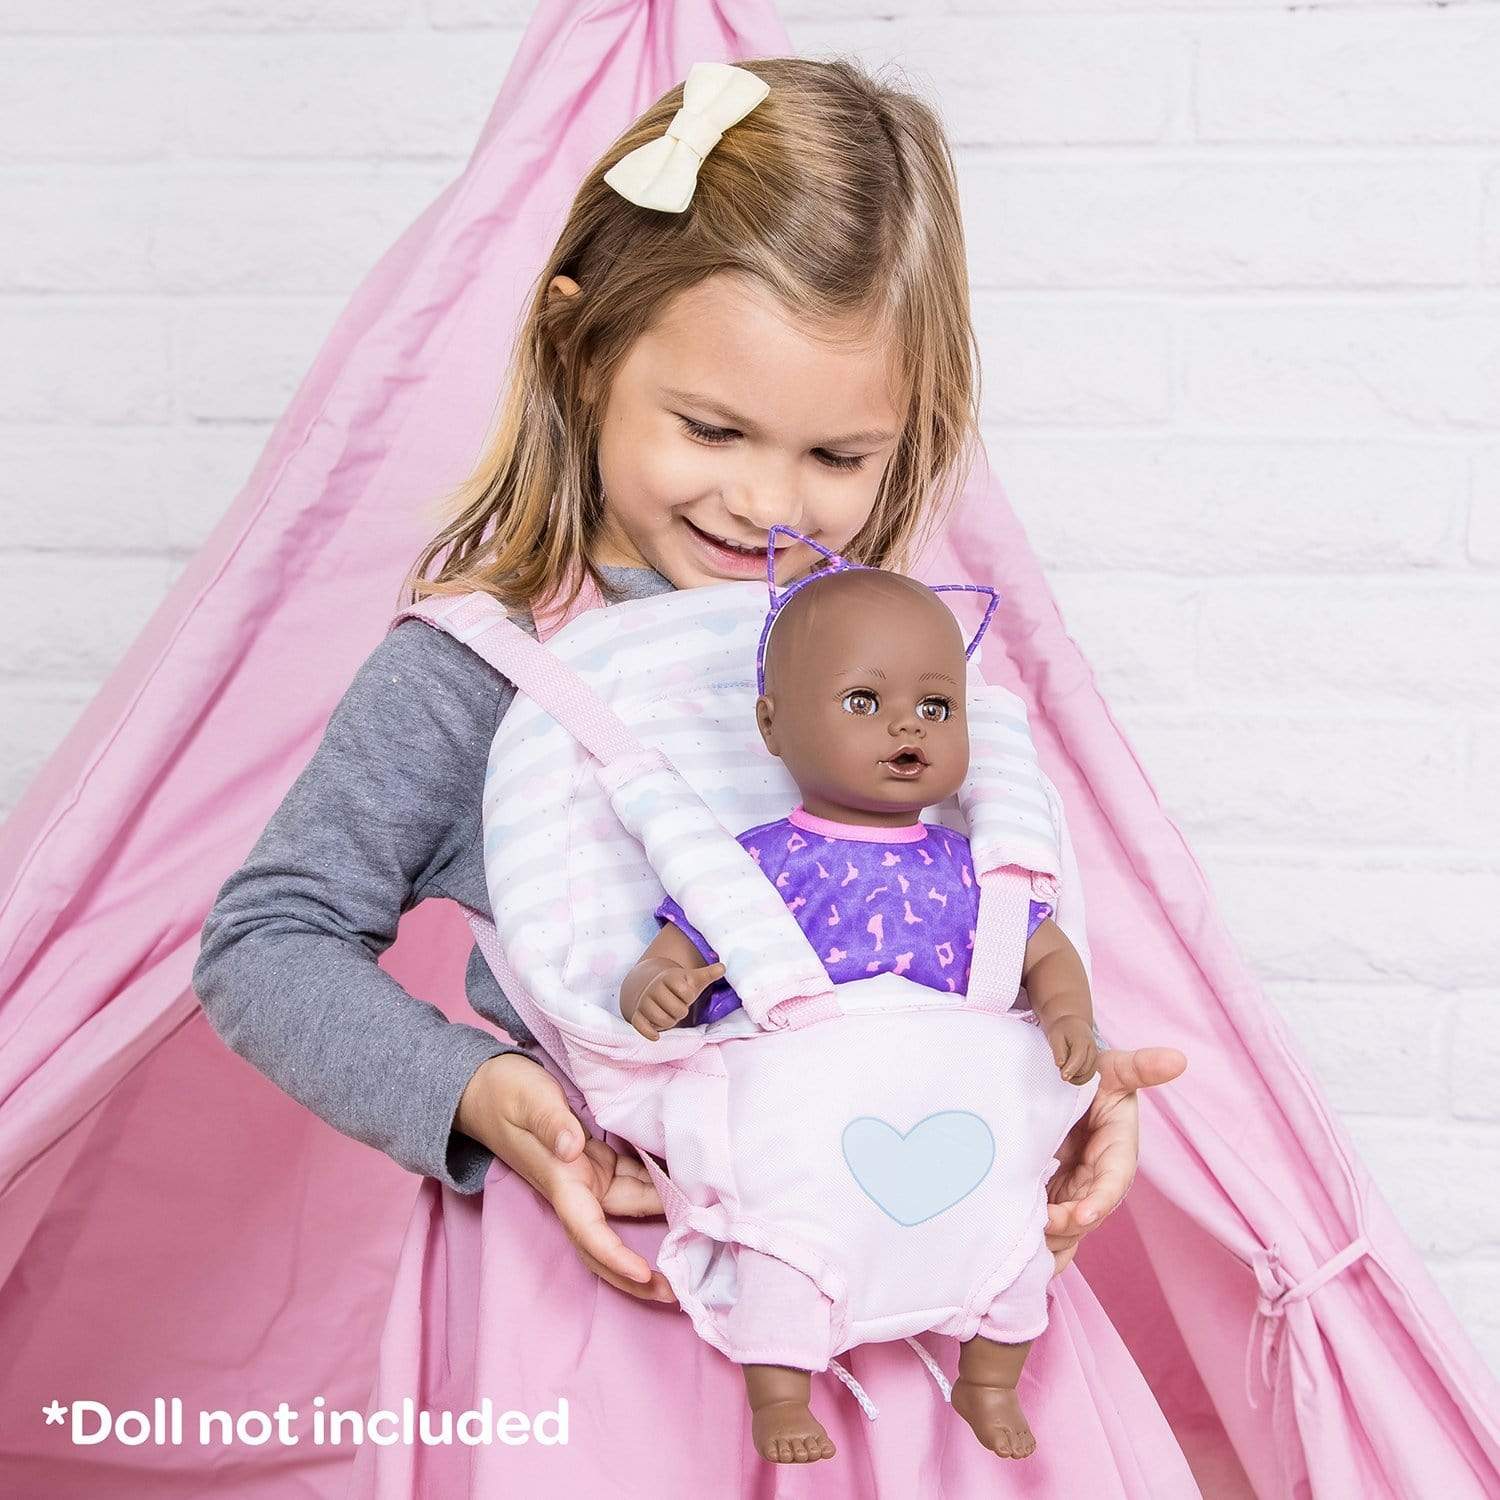 Adora Baby Doll Carrier in Classic Pastel Pink Print, Doll Accessories